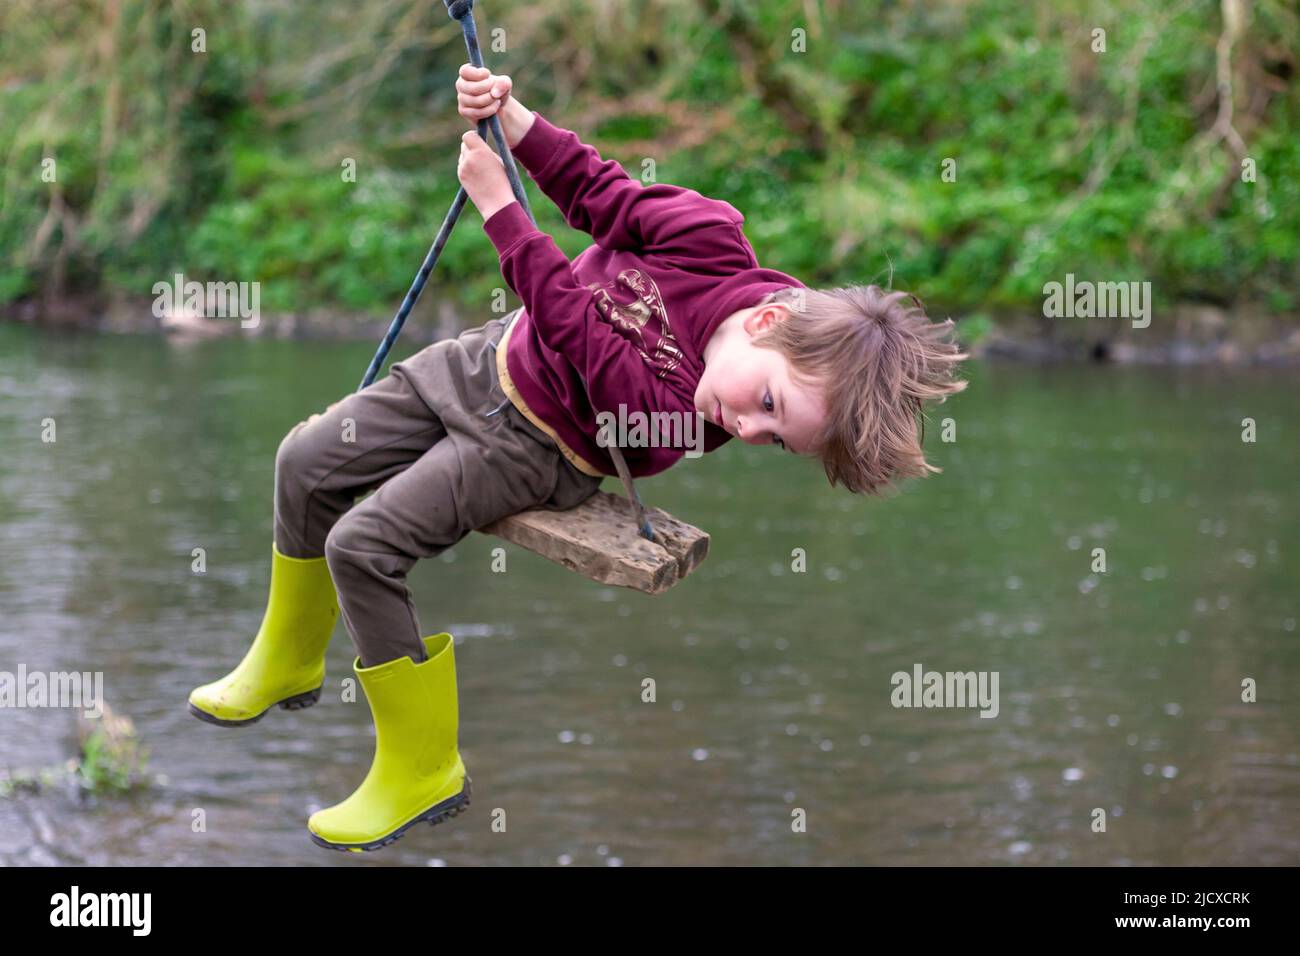 Five-year old boy playing on a rope swing over a river.  MODEL RELEASED Stock Photo